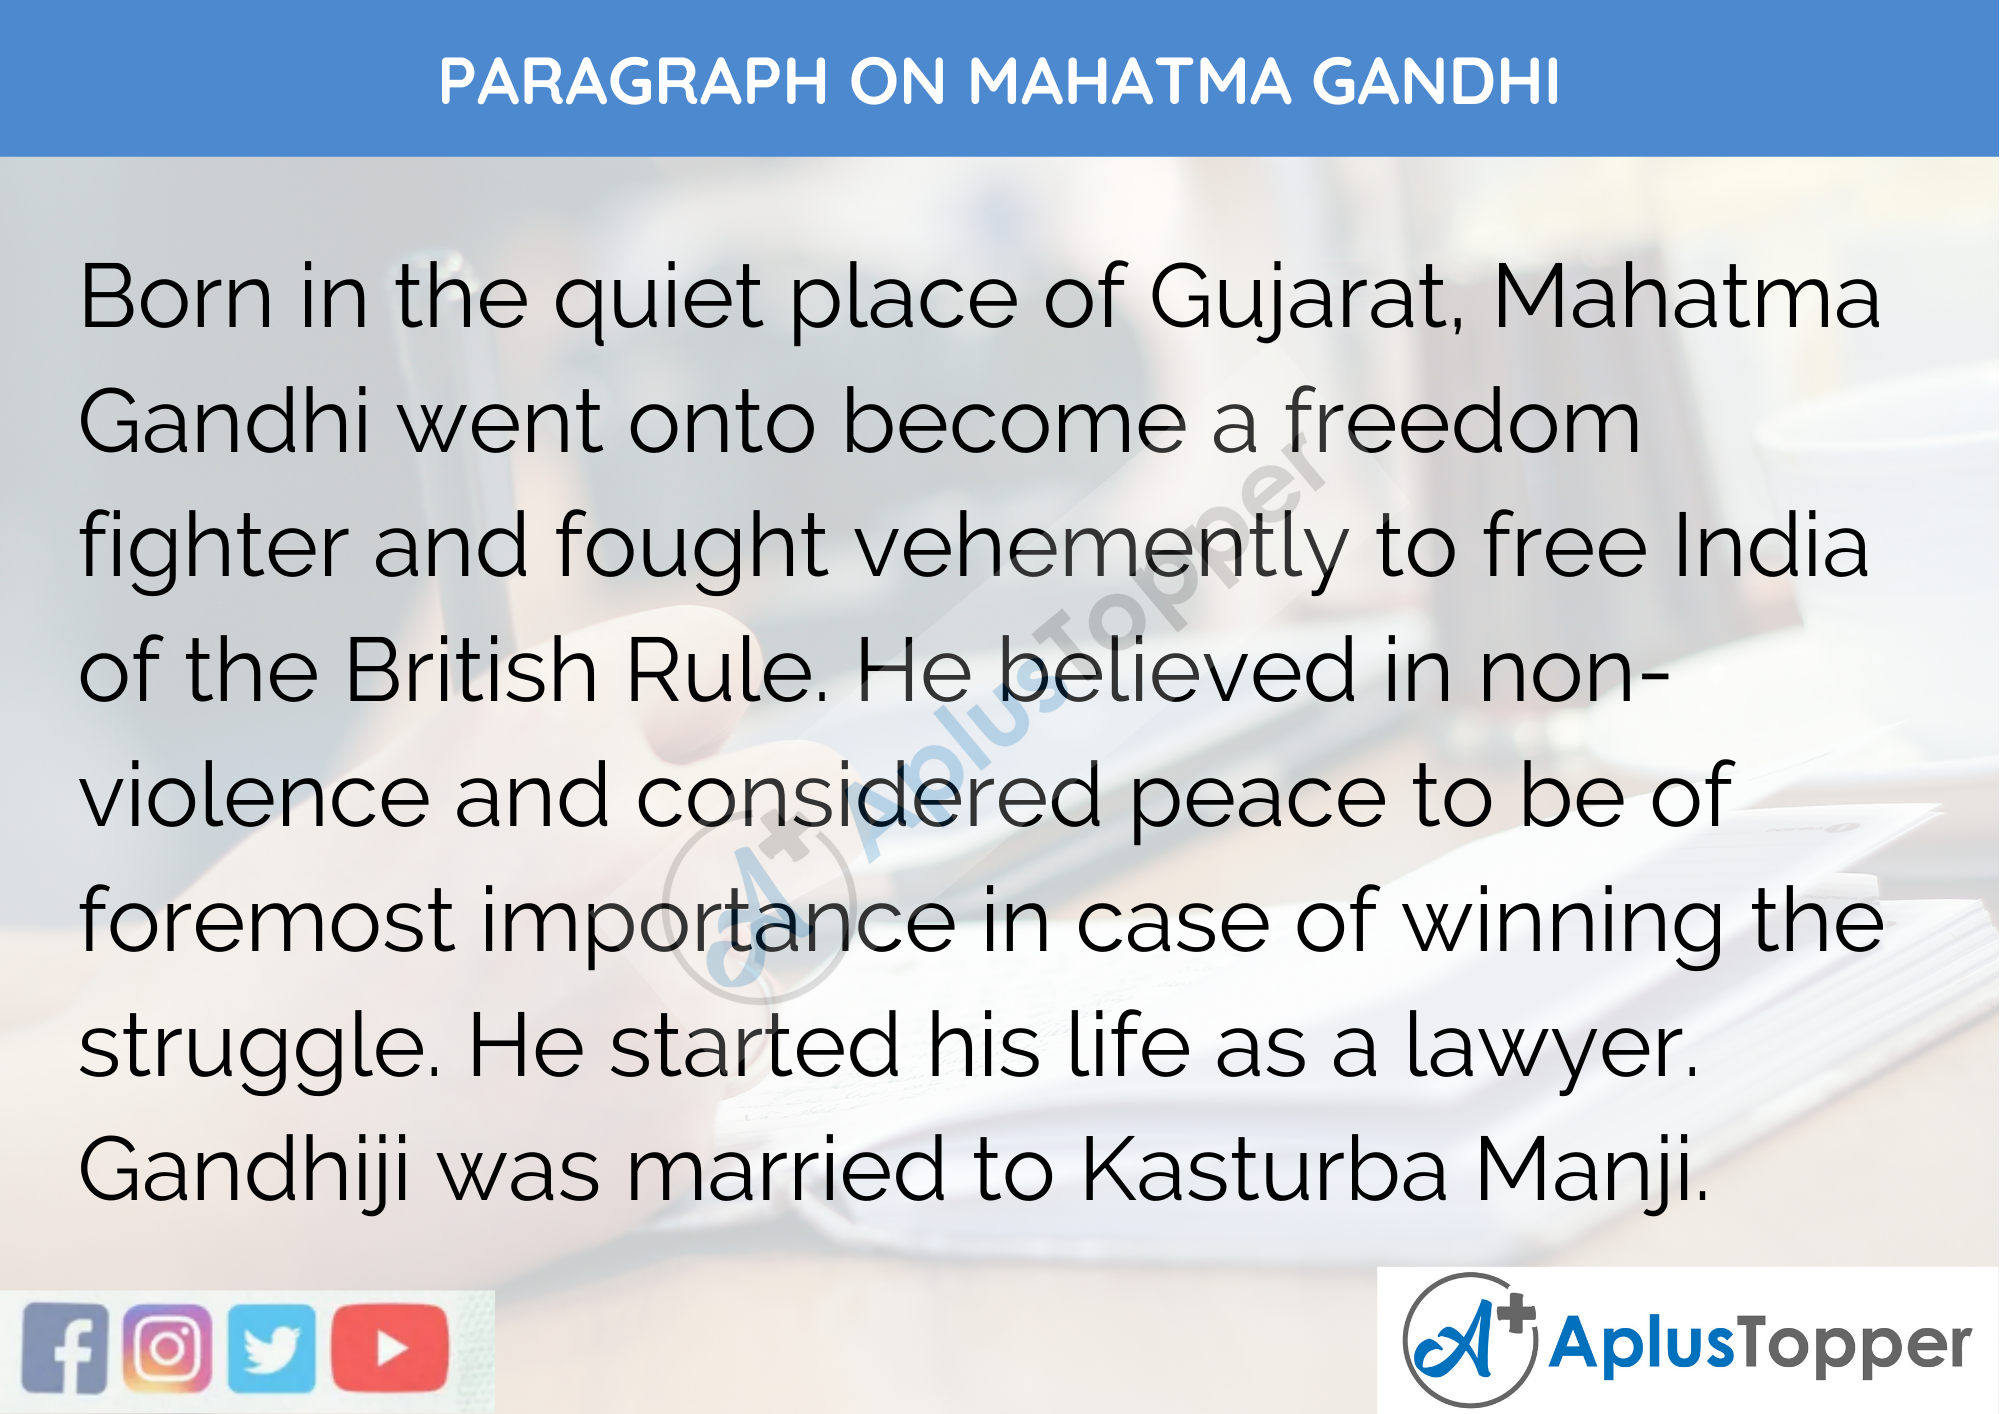 Paragraph On Mahatma Gandhi - 100 Words for Class 1,2,3 Kids